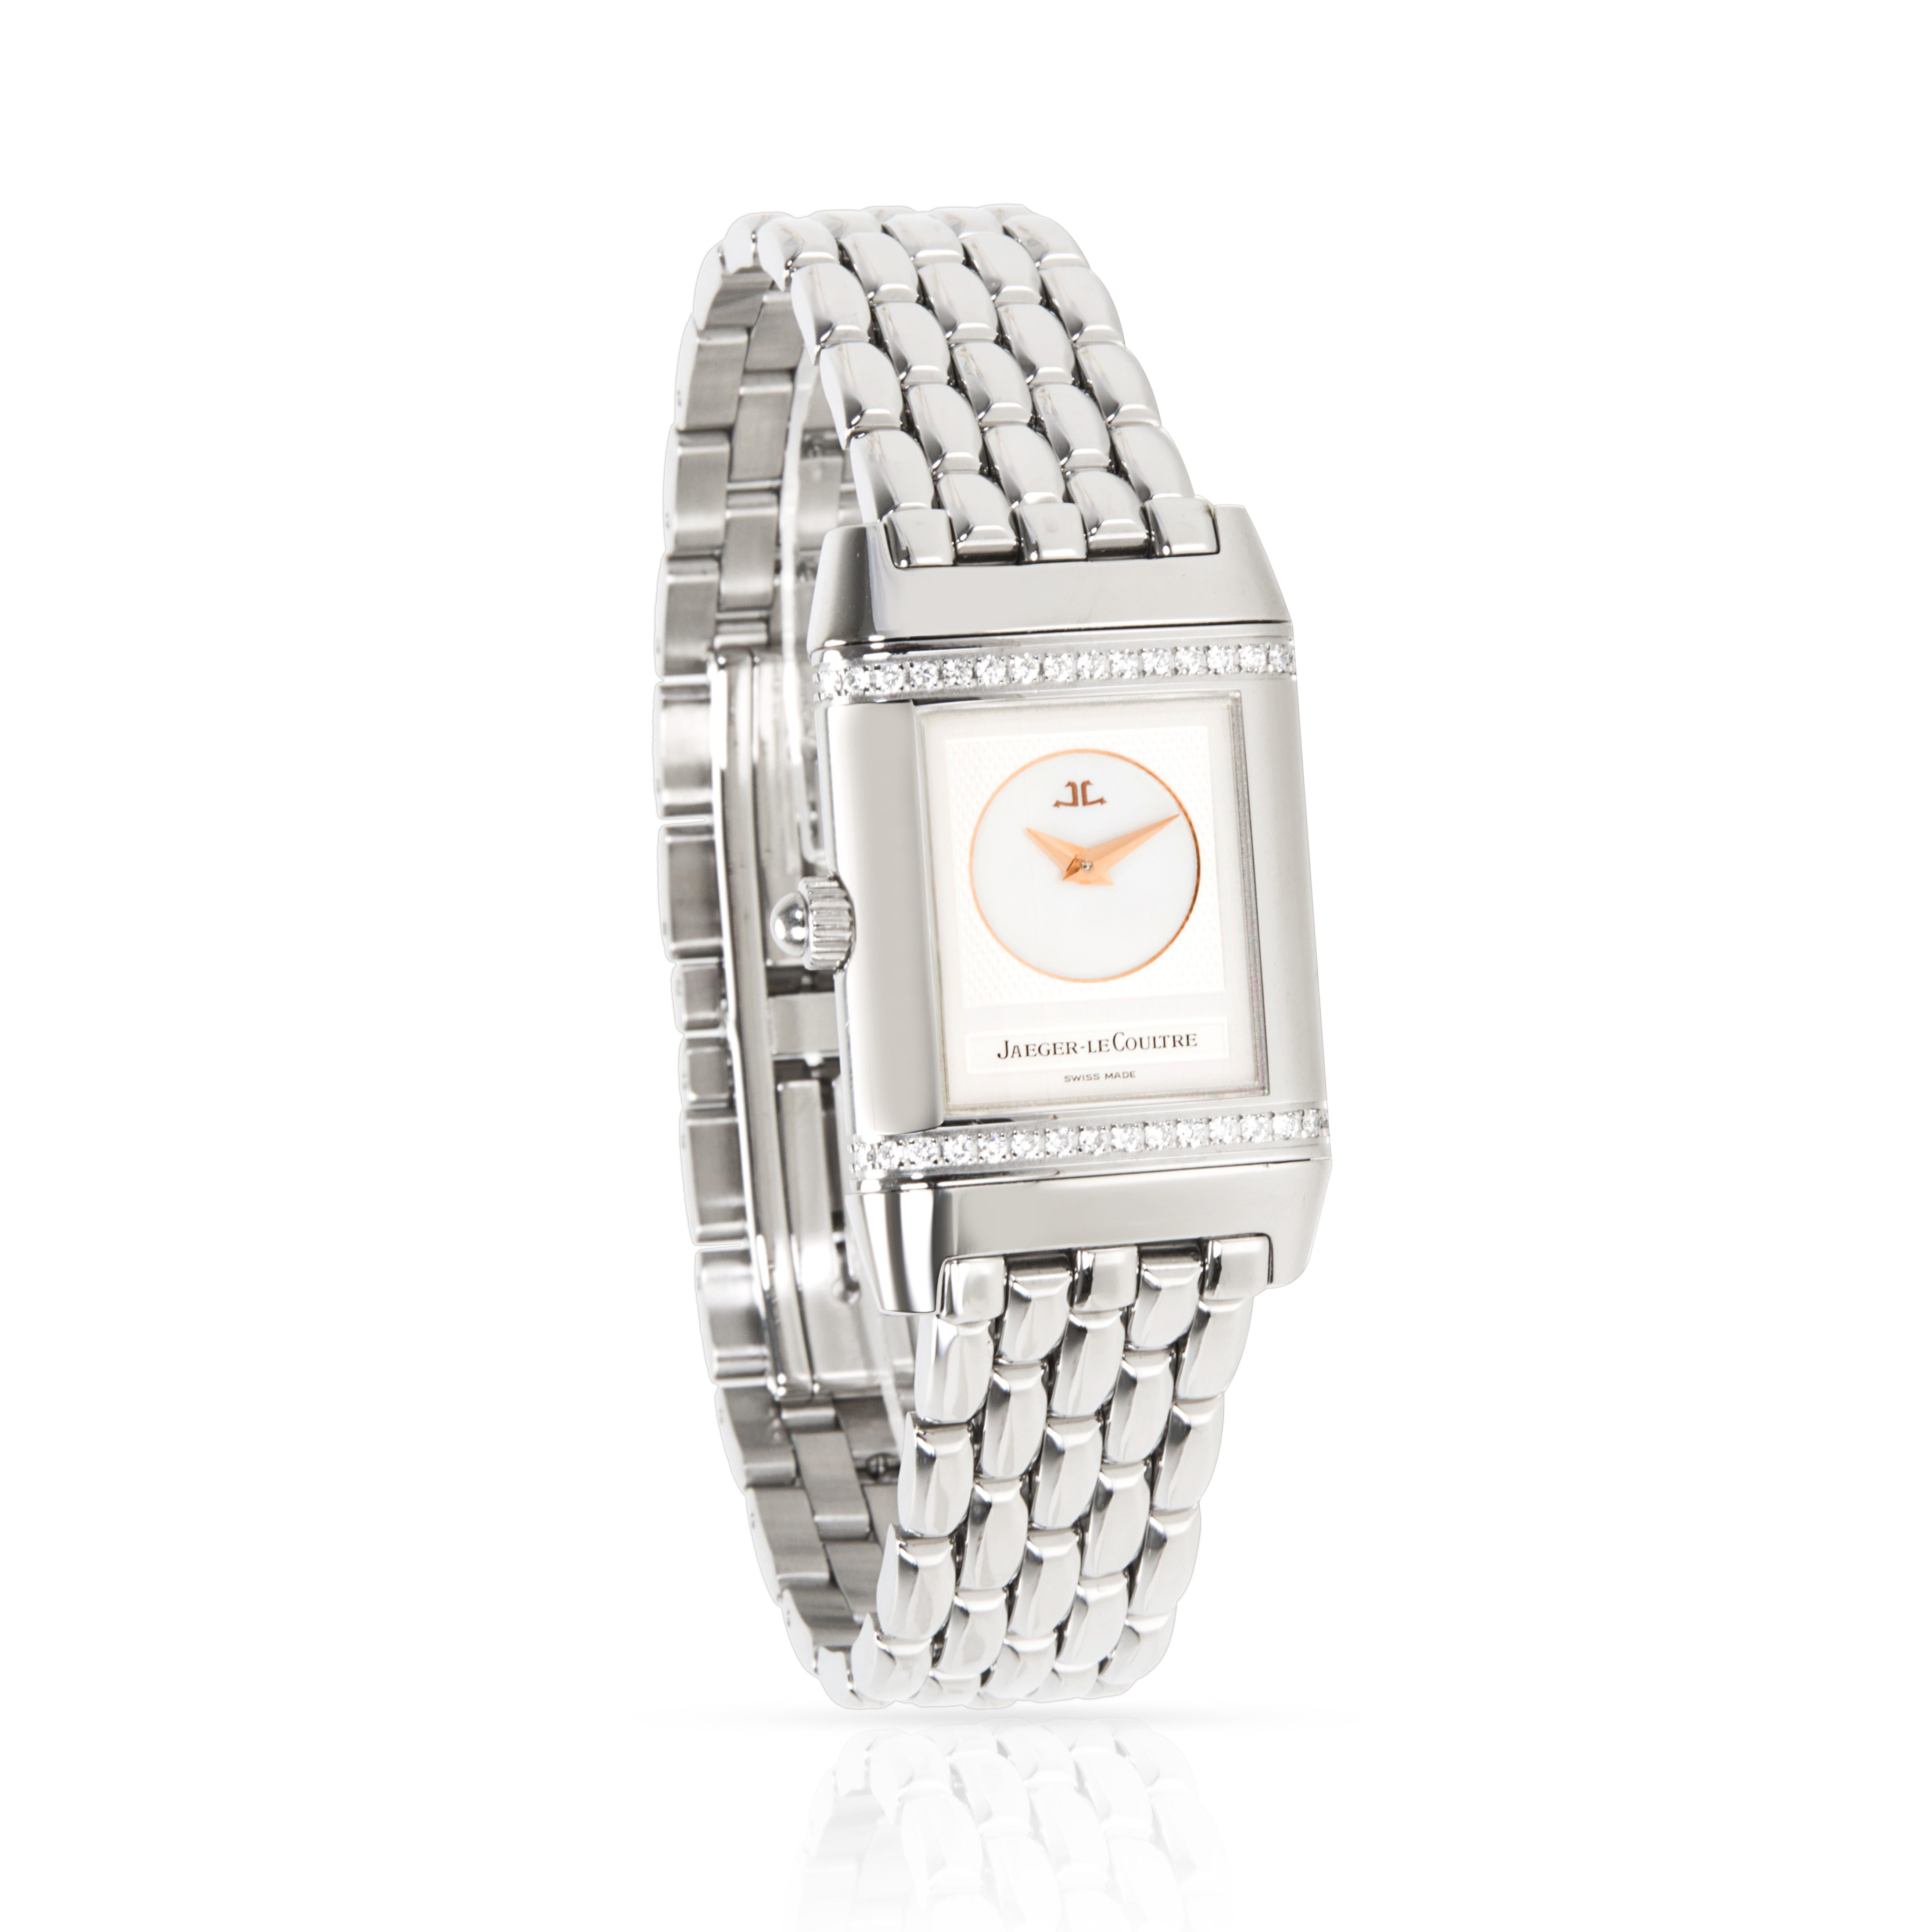 Jaeger-LeCoultre Duetto 266.8.44 Women's Watch in Stainless Steel 2